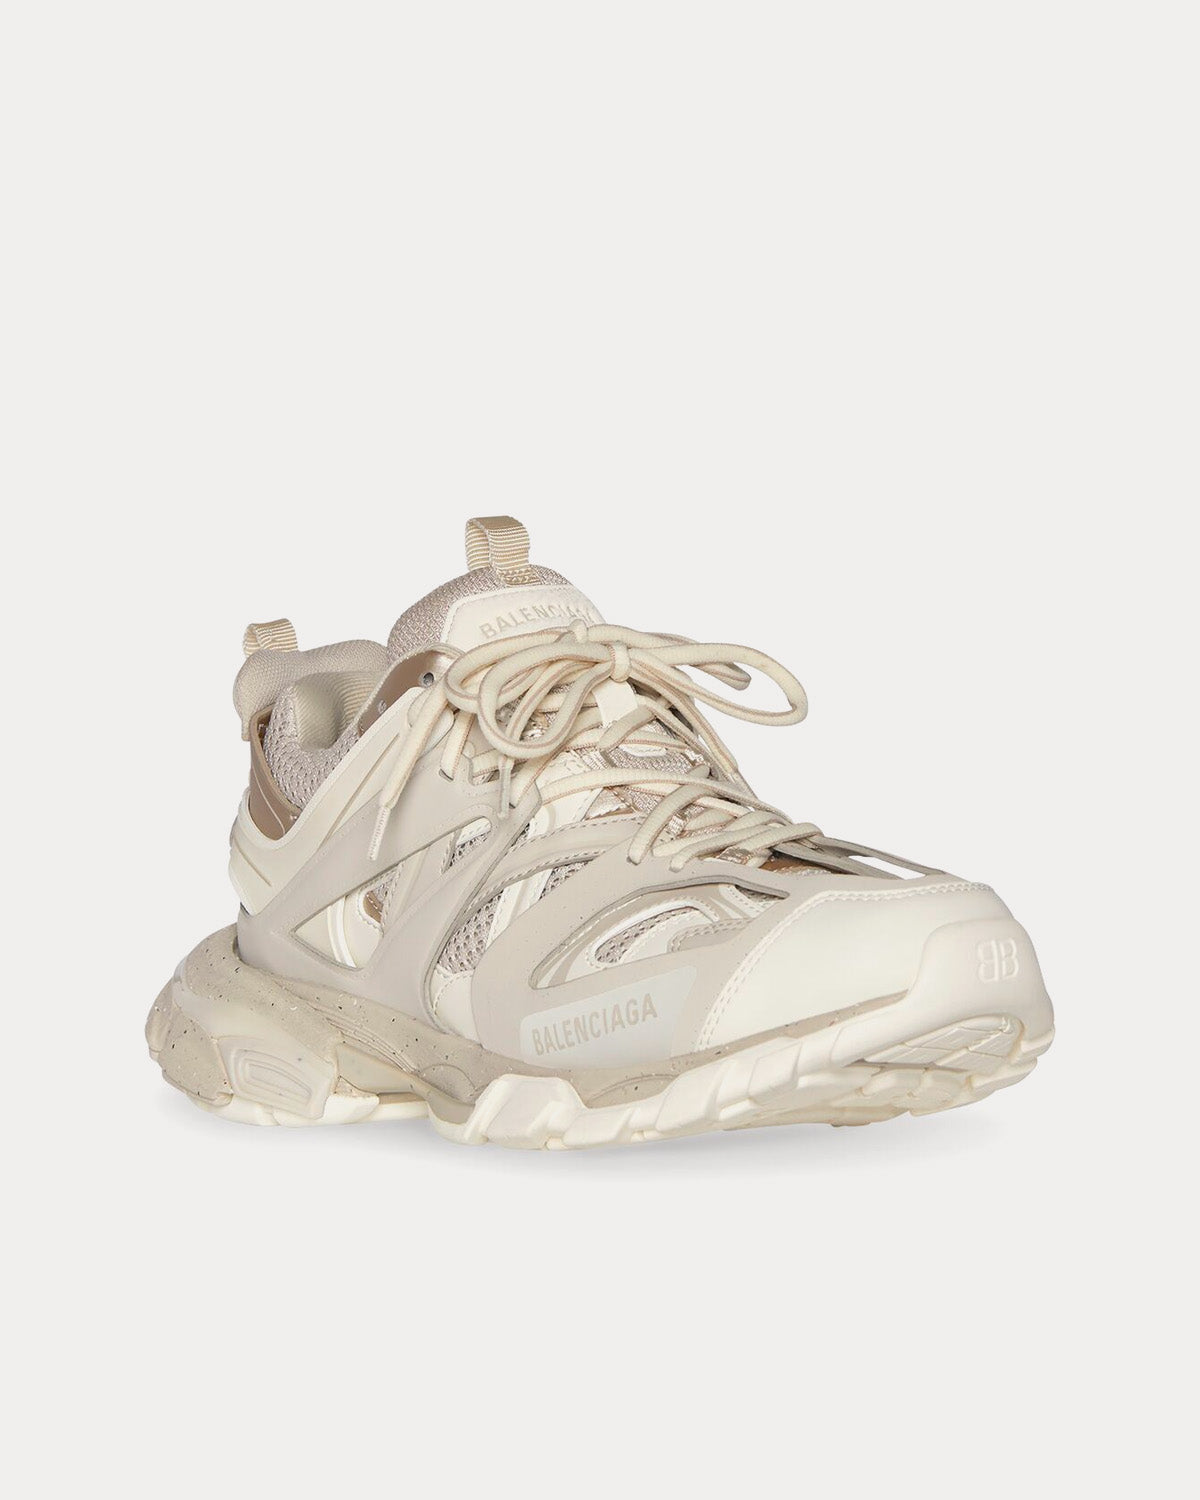 Balenciaga - Track Recycled Sole Mesh & Nylon Light Beige Low Top Sneakers